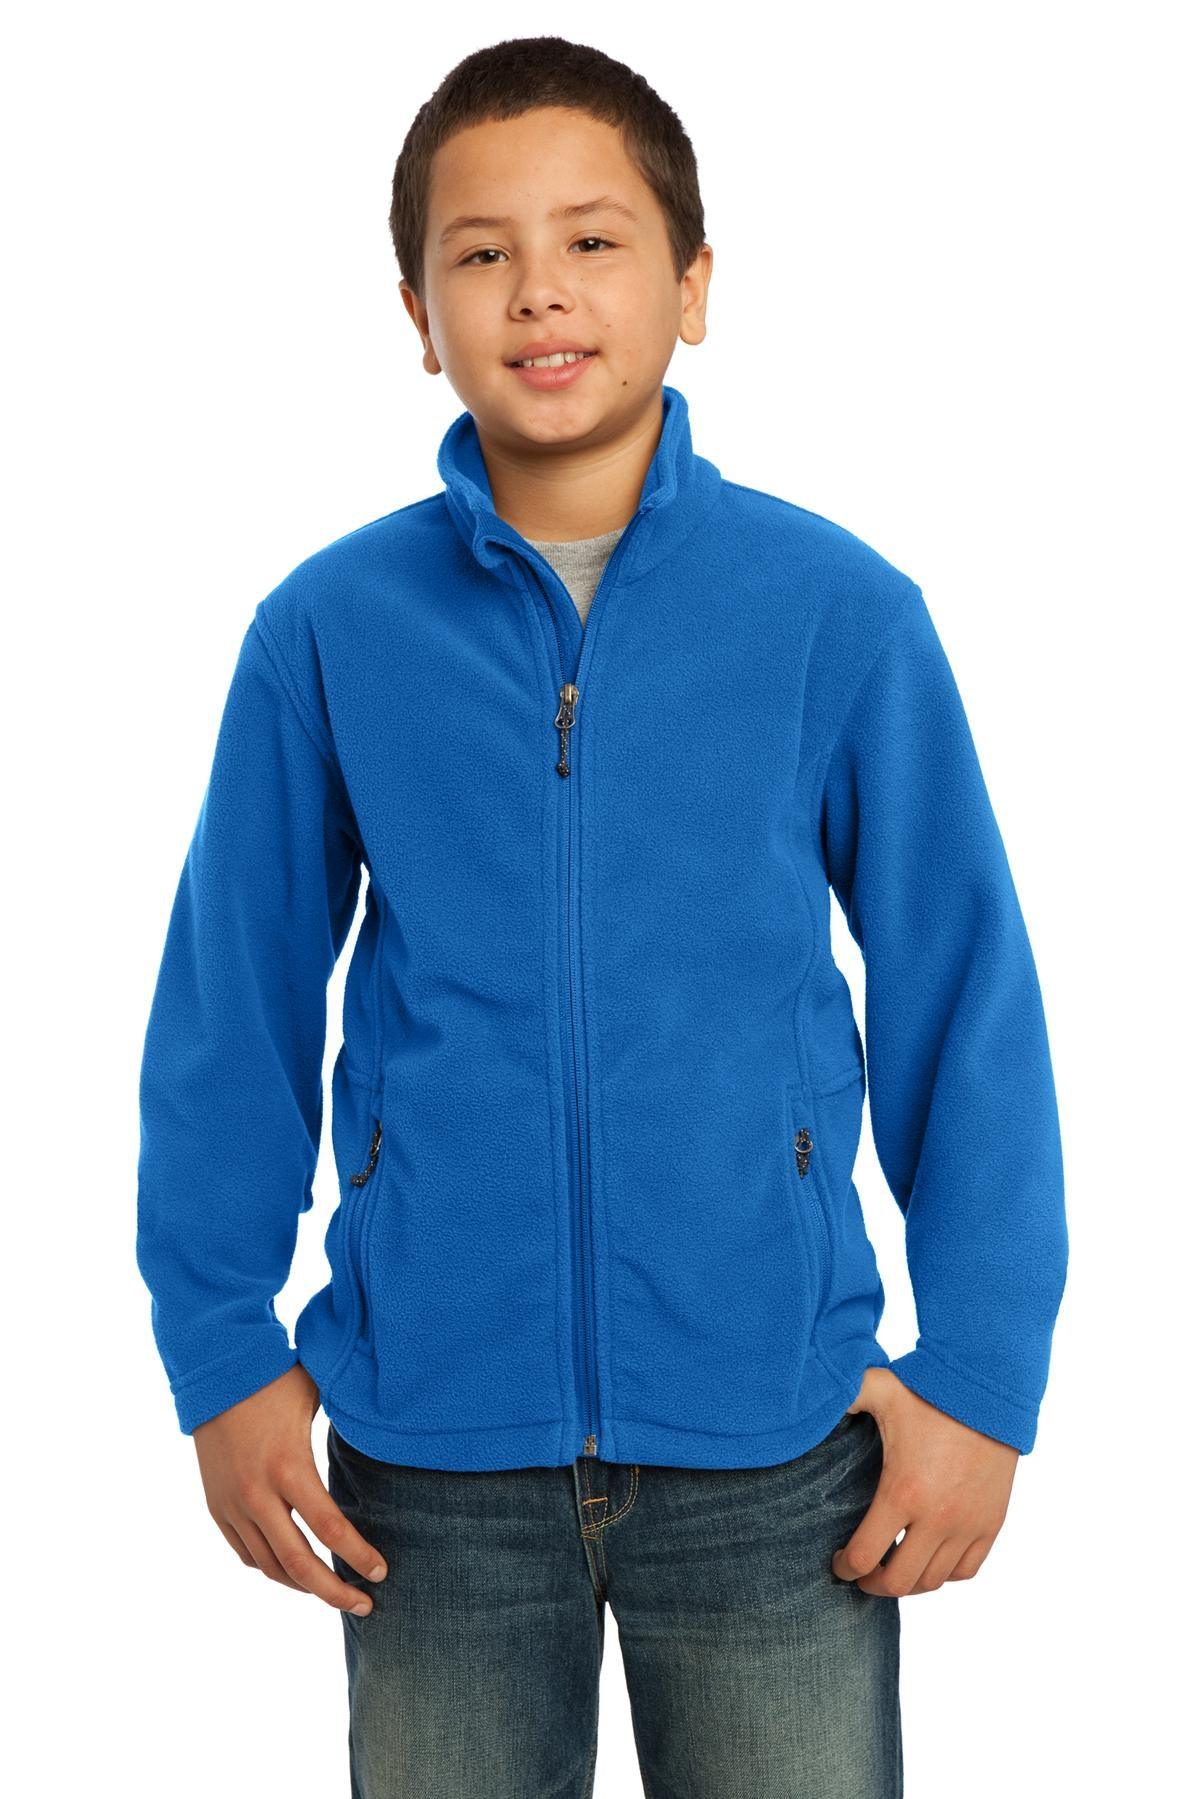 Port Authority Youth Value Fleece Jacket. Y217 - Dresses Max